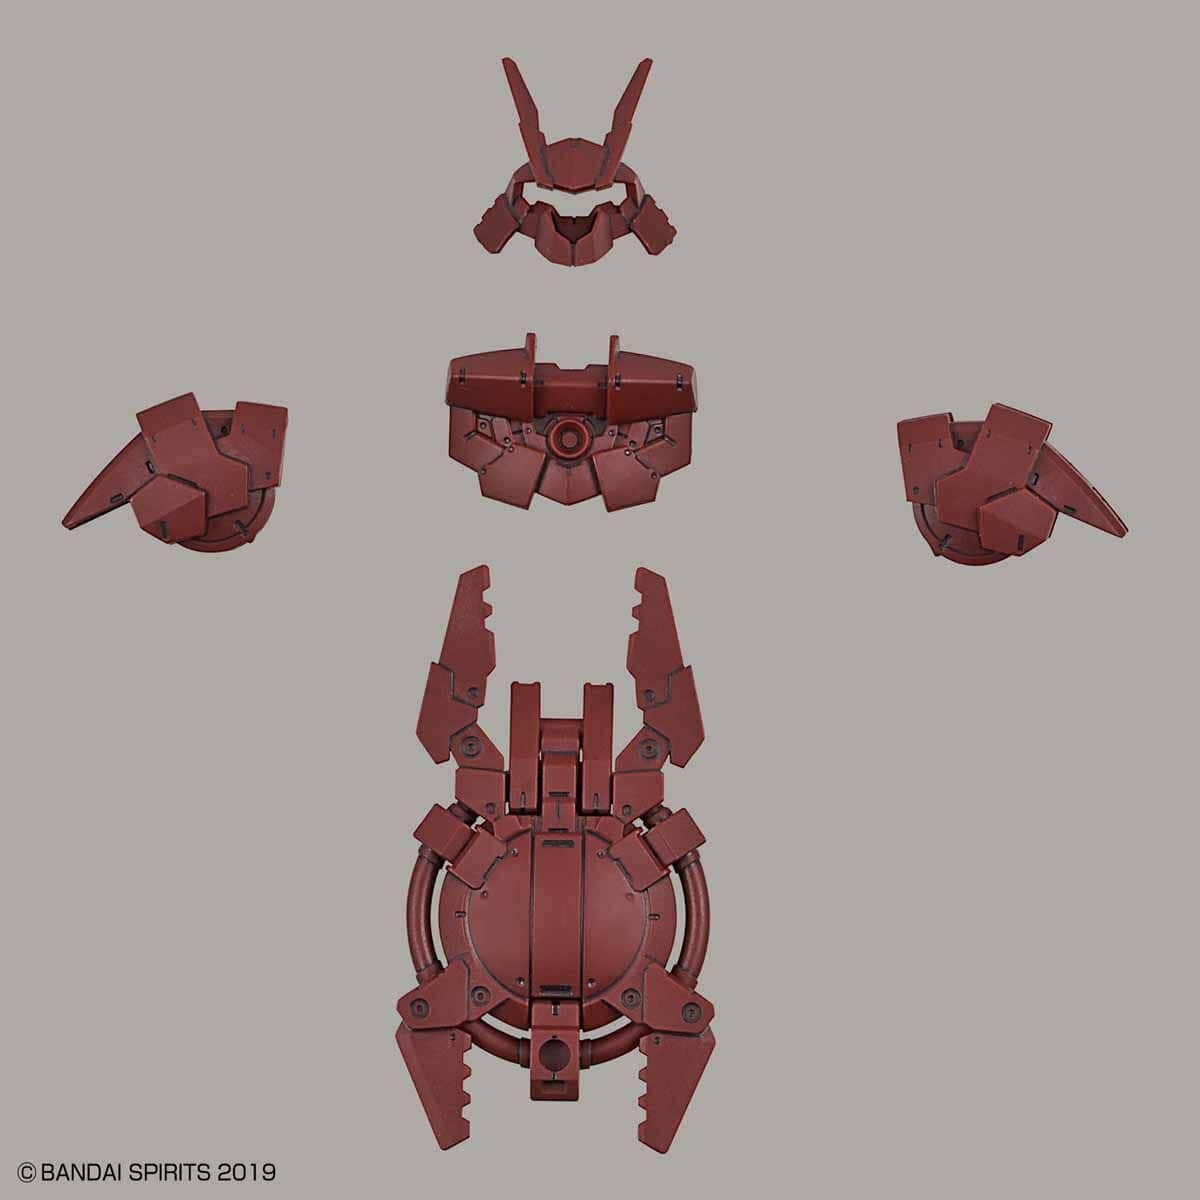 Bandai - 30MM 1/144 OPTION ARMOR FOR CLOSE FIGHTING [PORTANOVA EXCLUSIVE/DARDK RED]